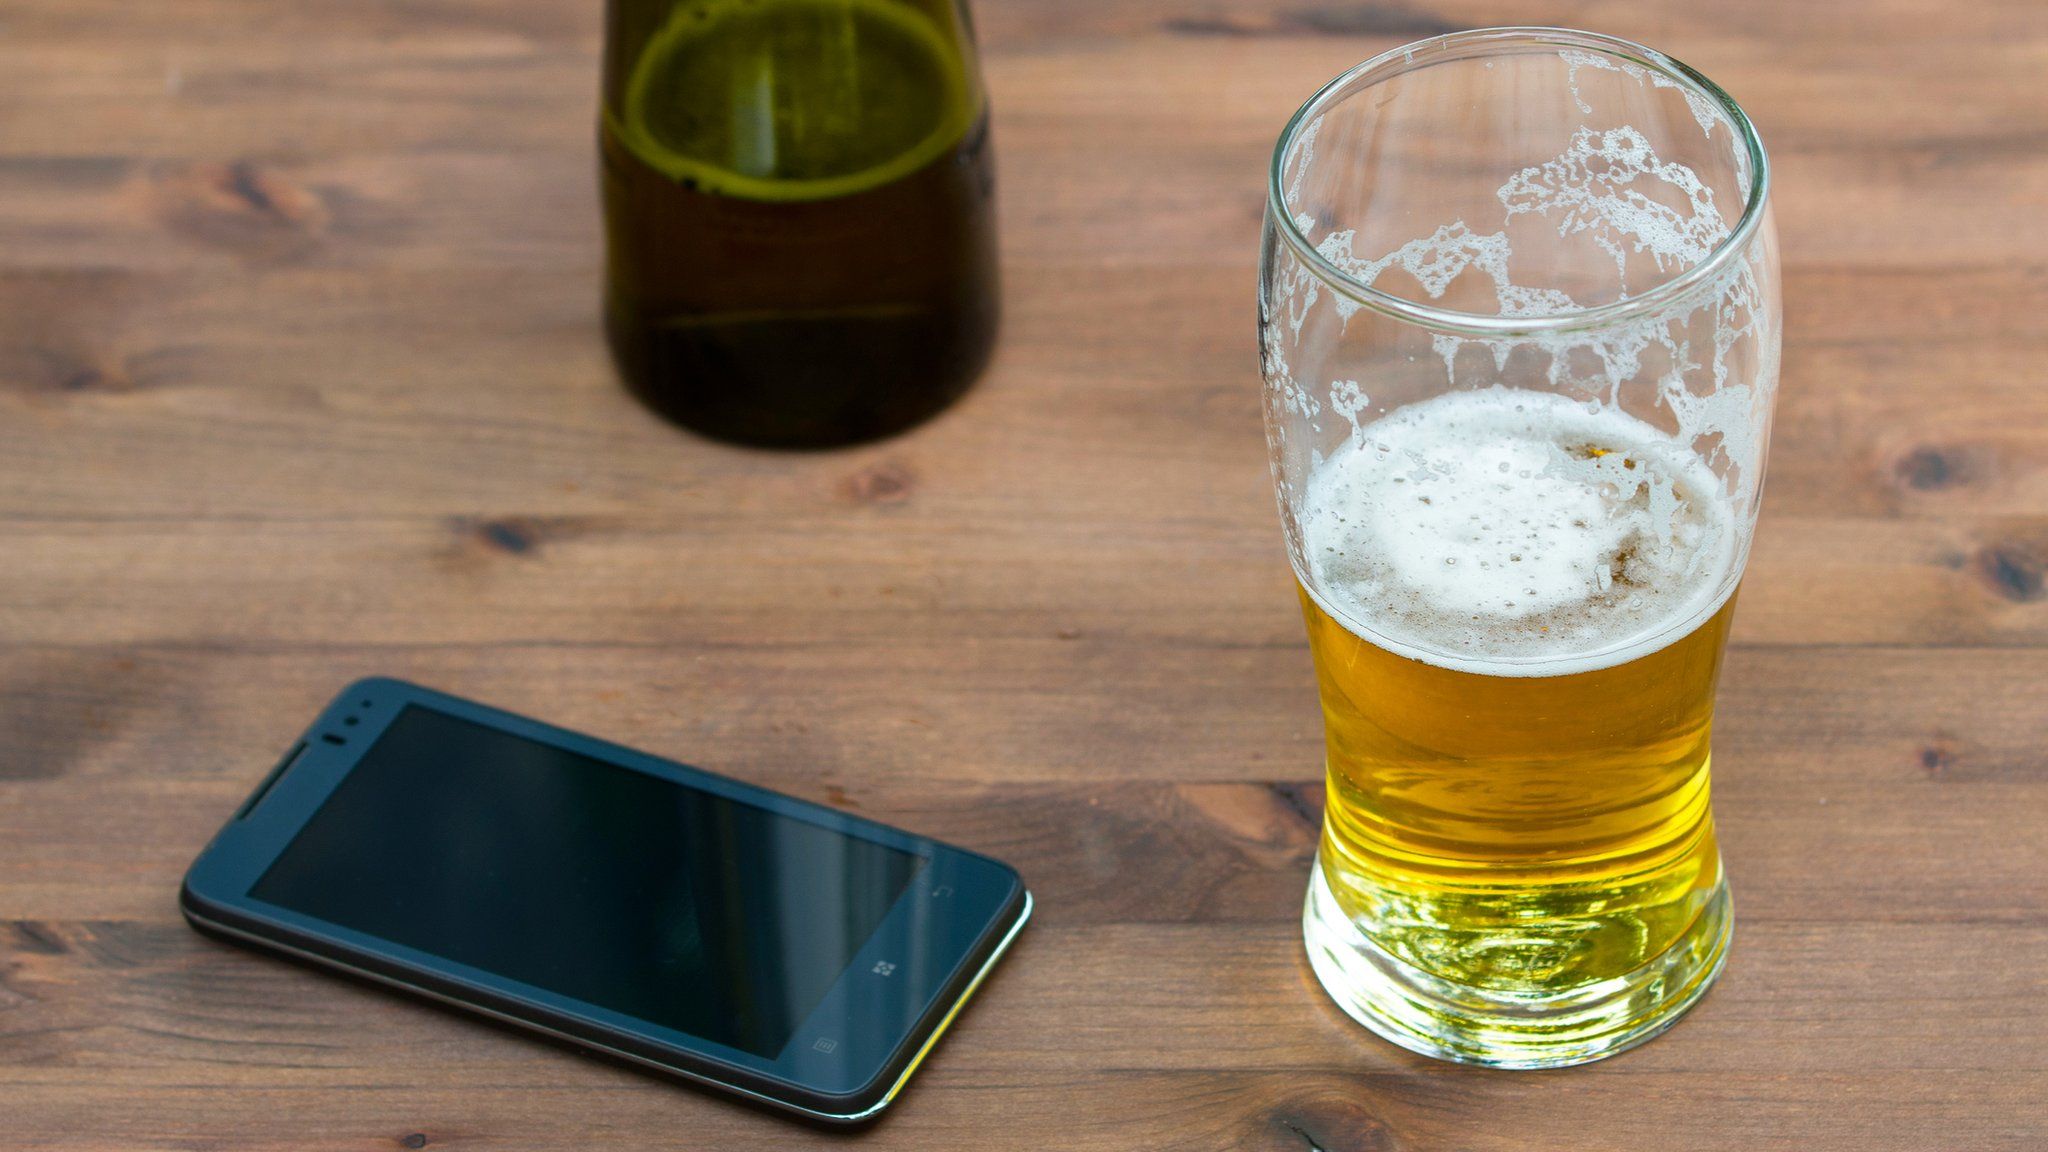 A pint glass and smartphone